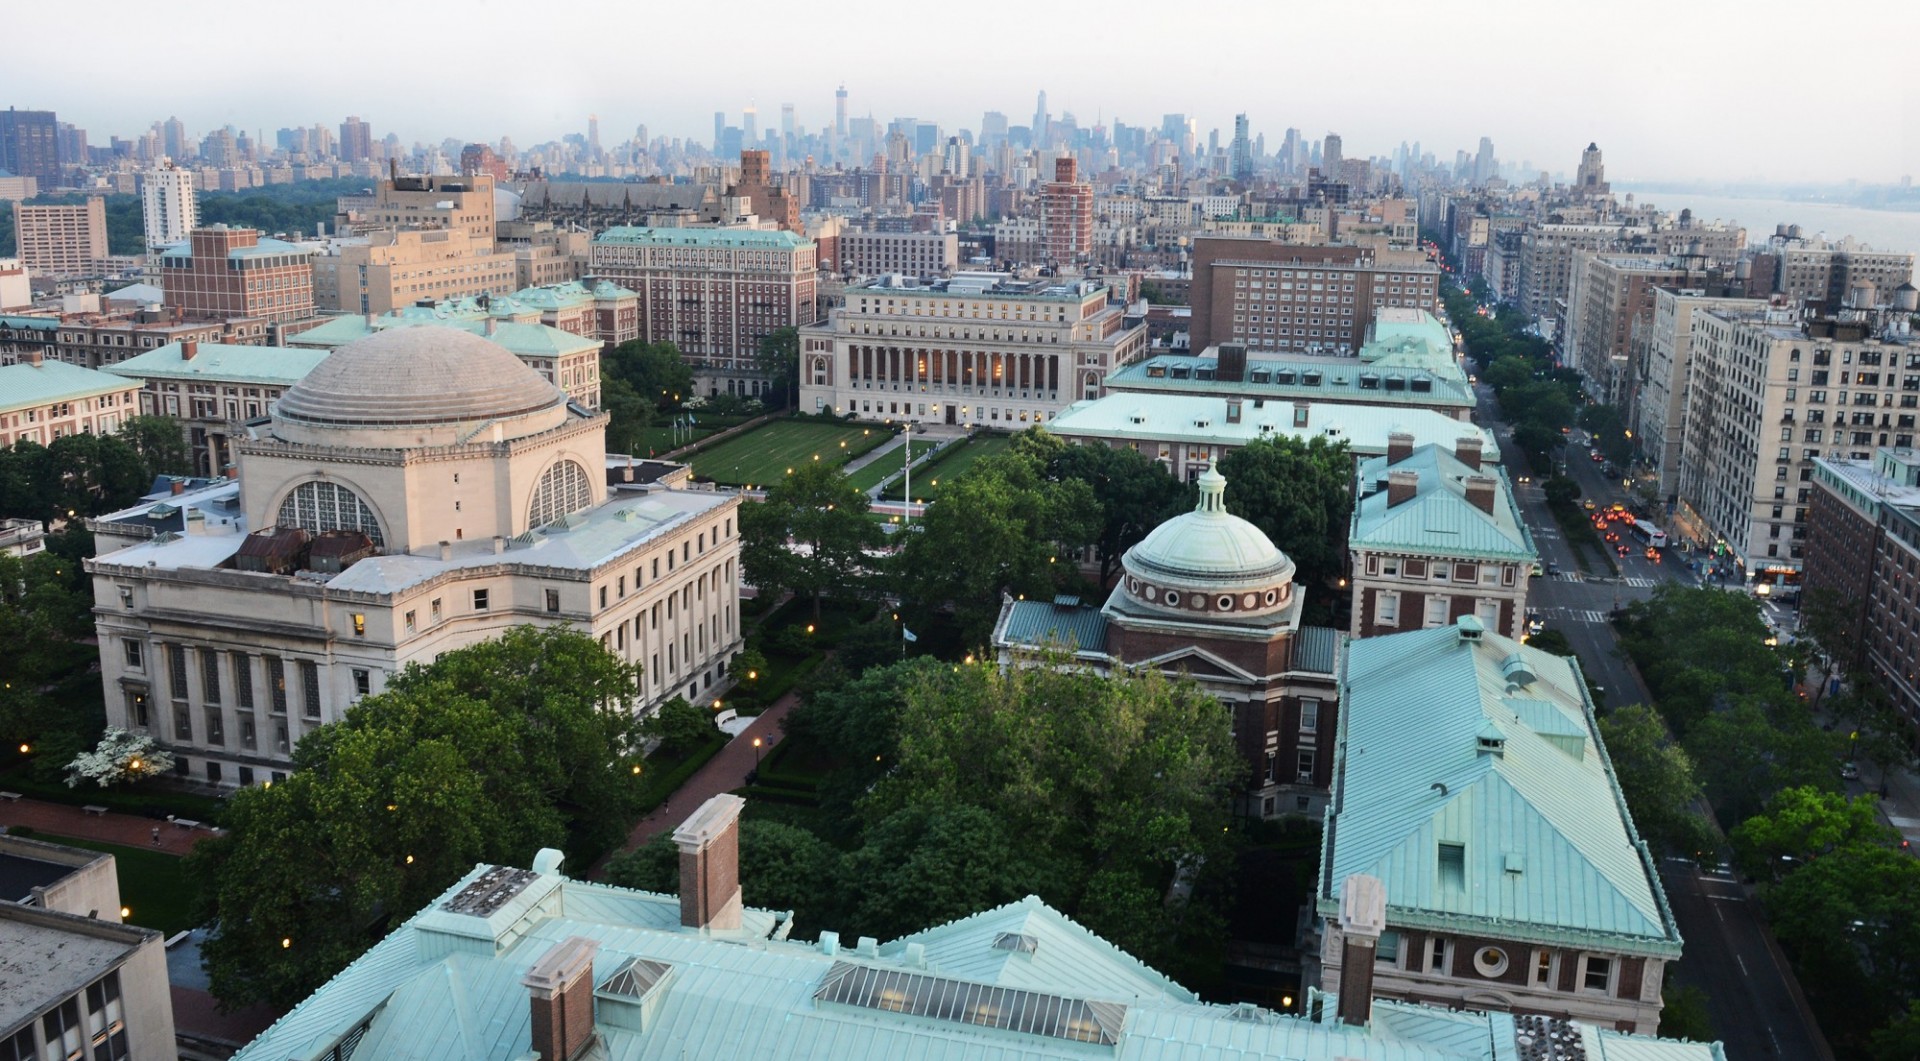 Columbia campus as seen from an aerial view